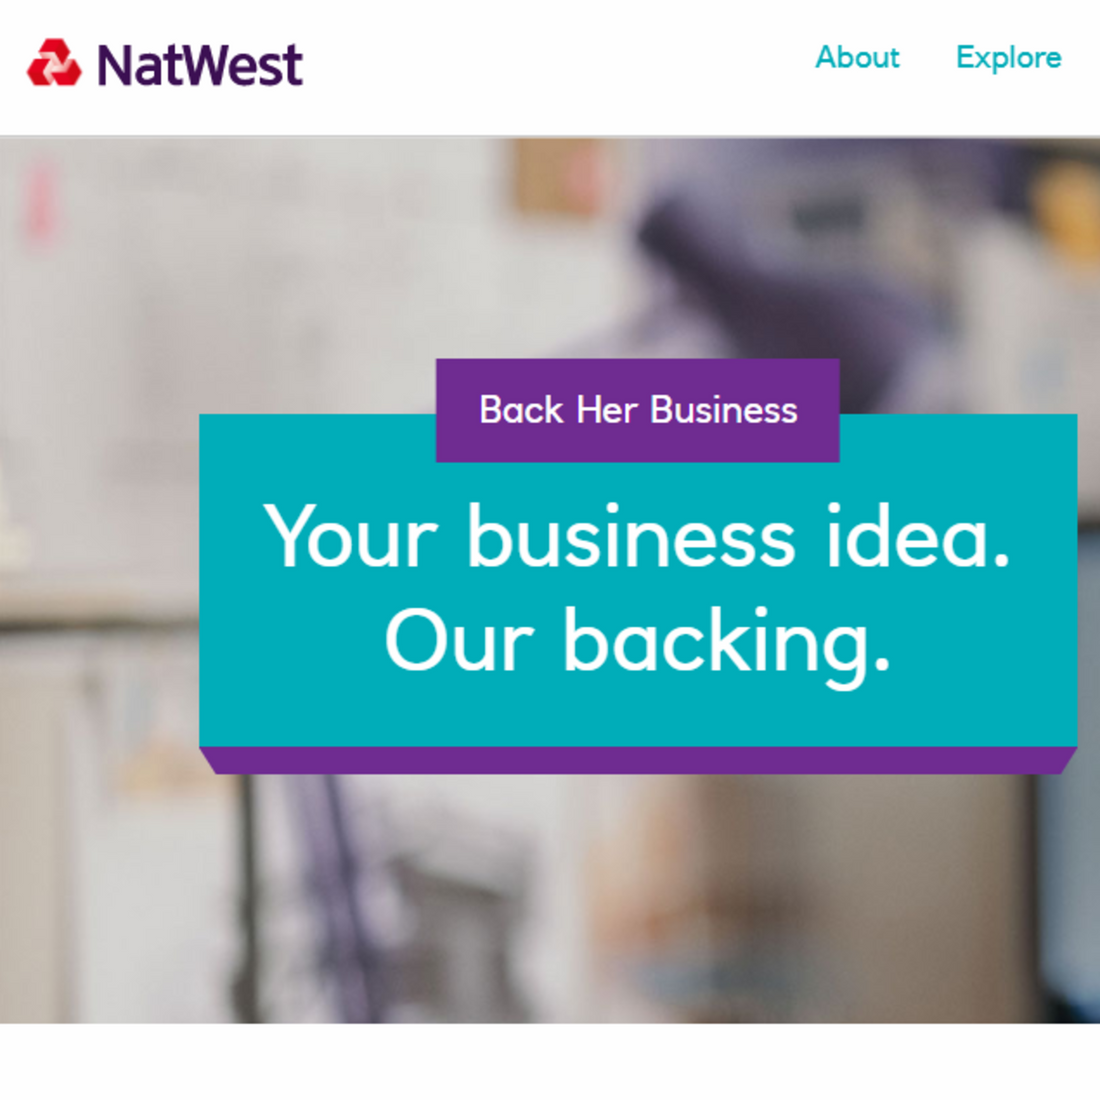 Screenshot of Back Her Business from NatWest